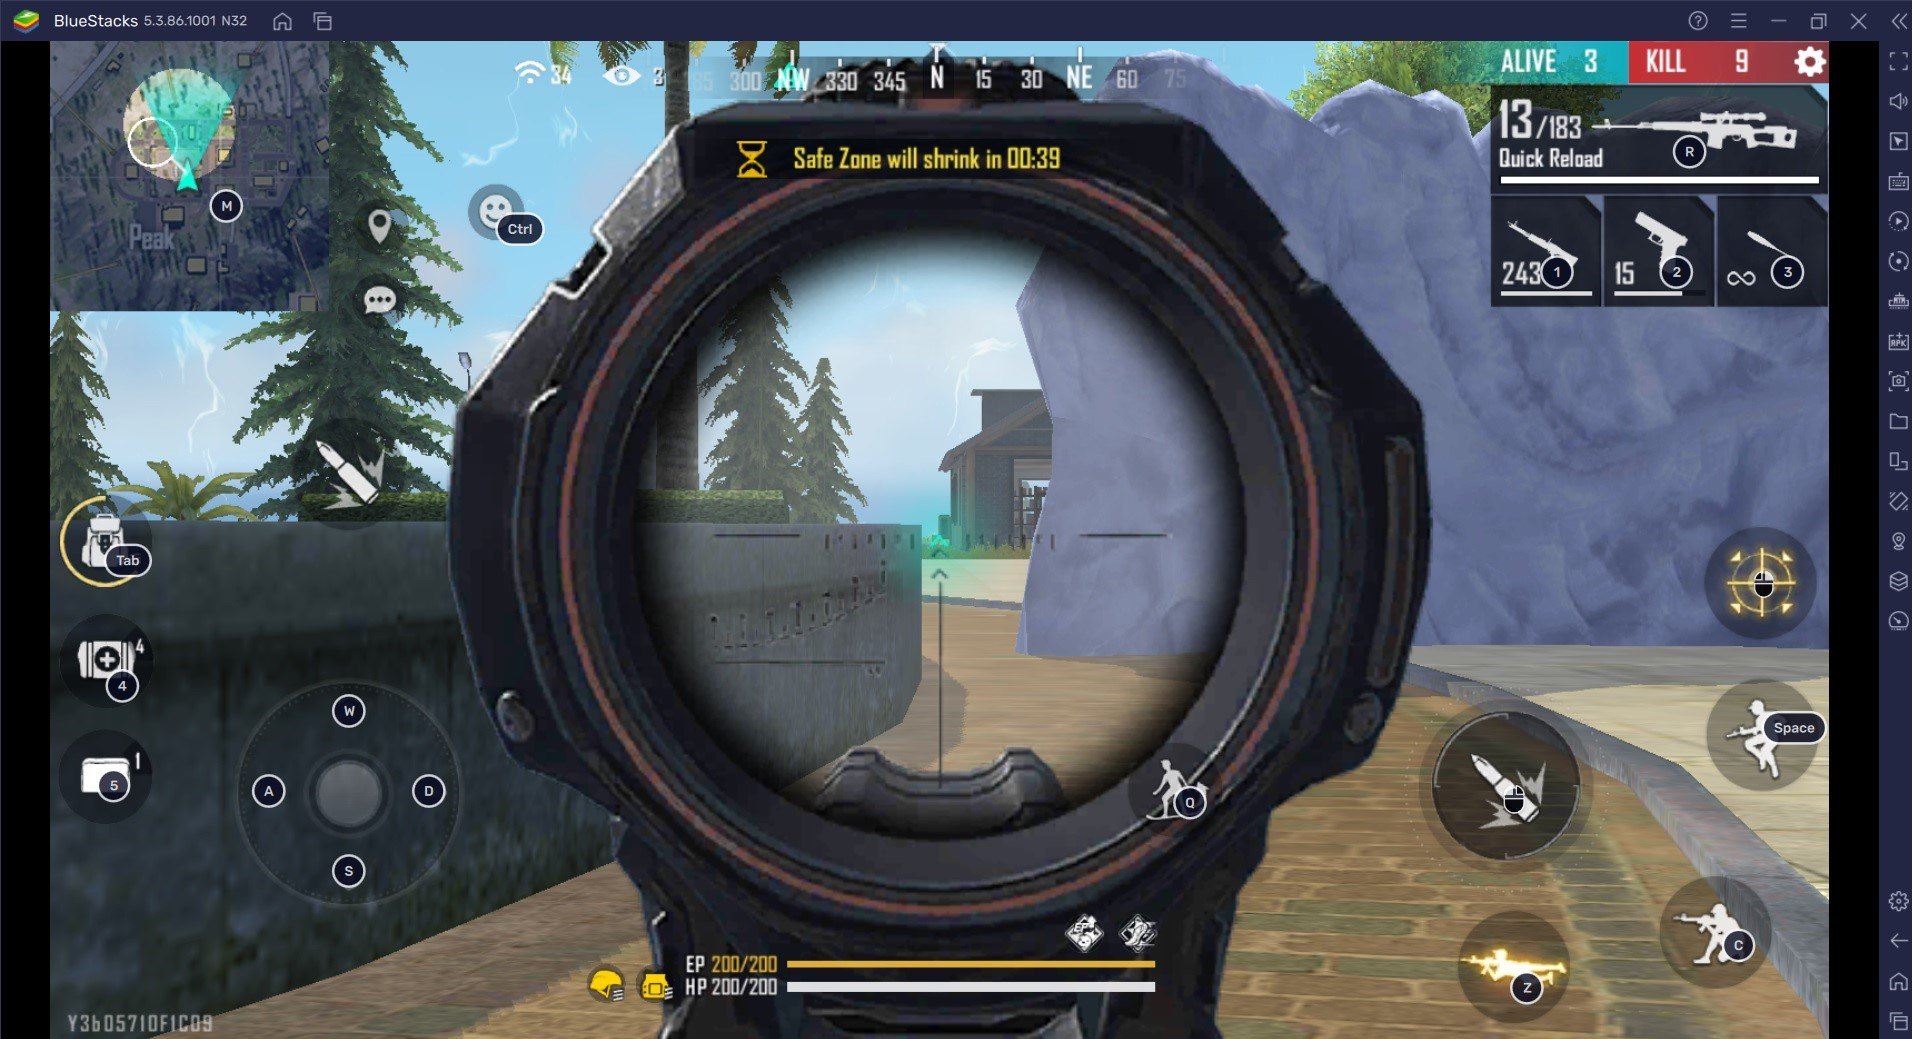 Free Fire Battle Royale Guide: Learn How to Use the Terrain to Dominate the Game